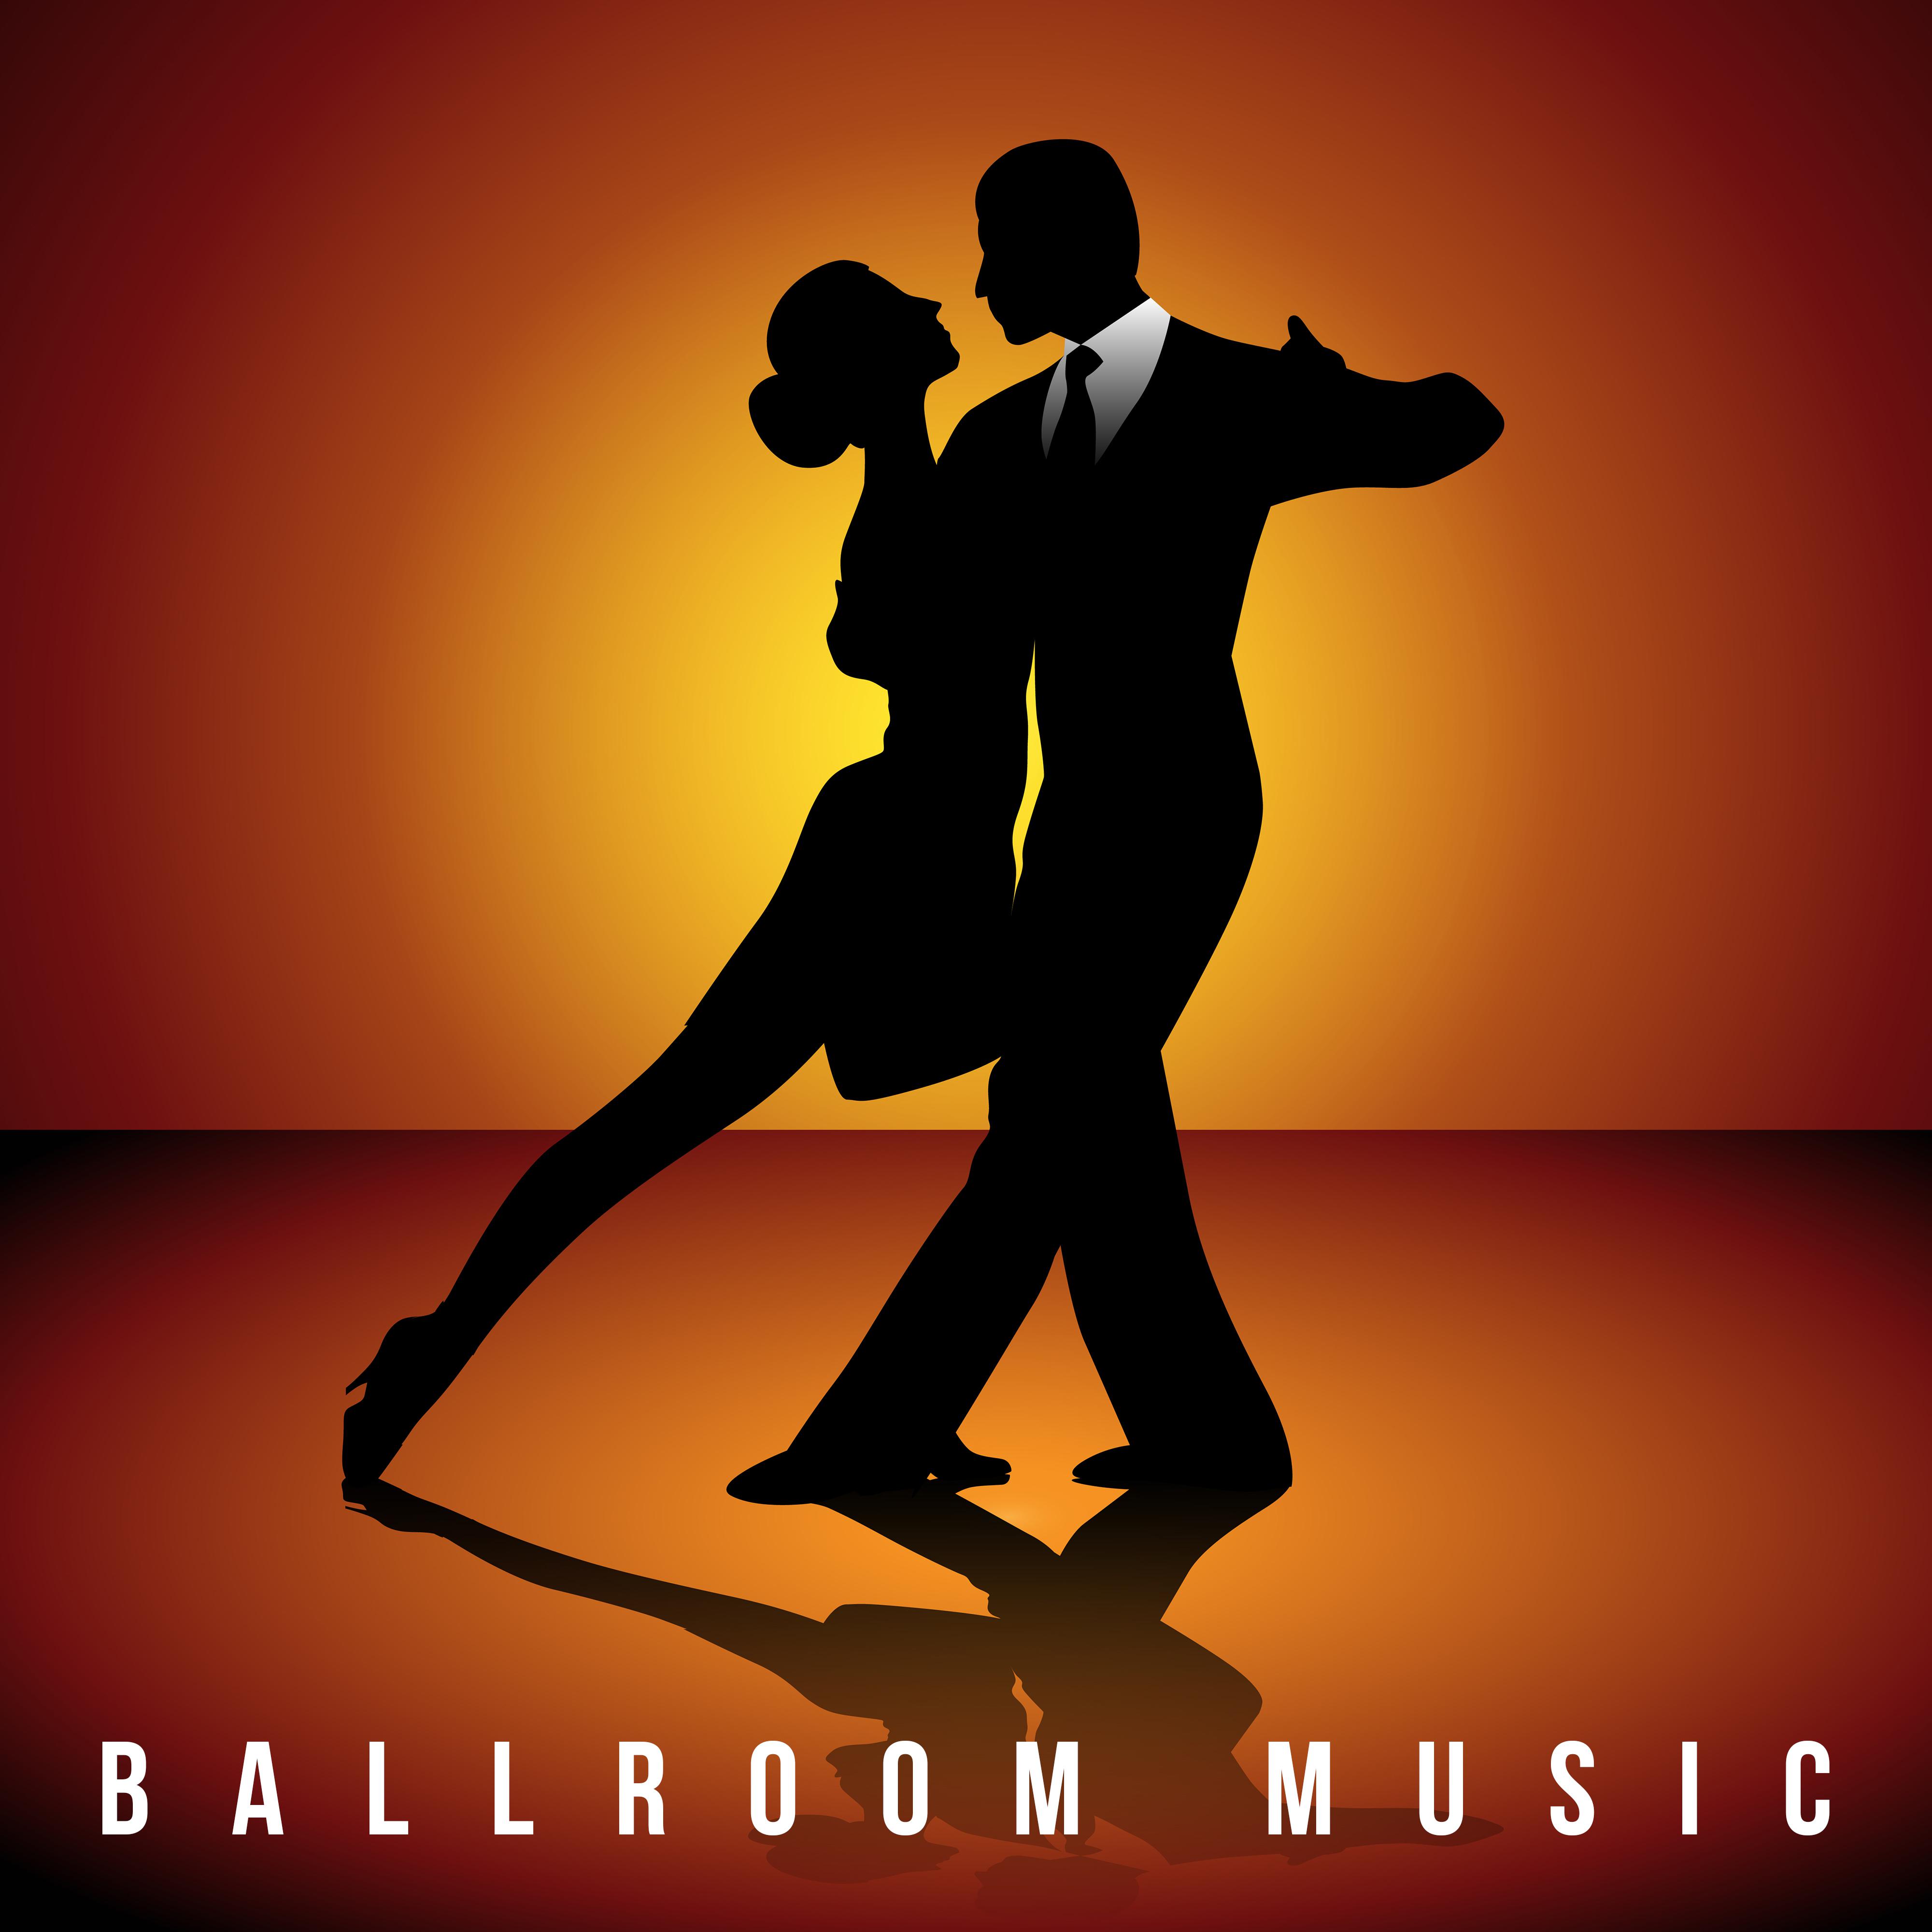 Ballroom Music: 15 Jazz Tracks for the Ball, Fancy Parties or Elegant Banquets